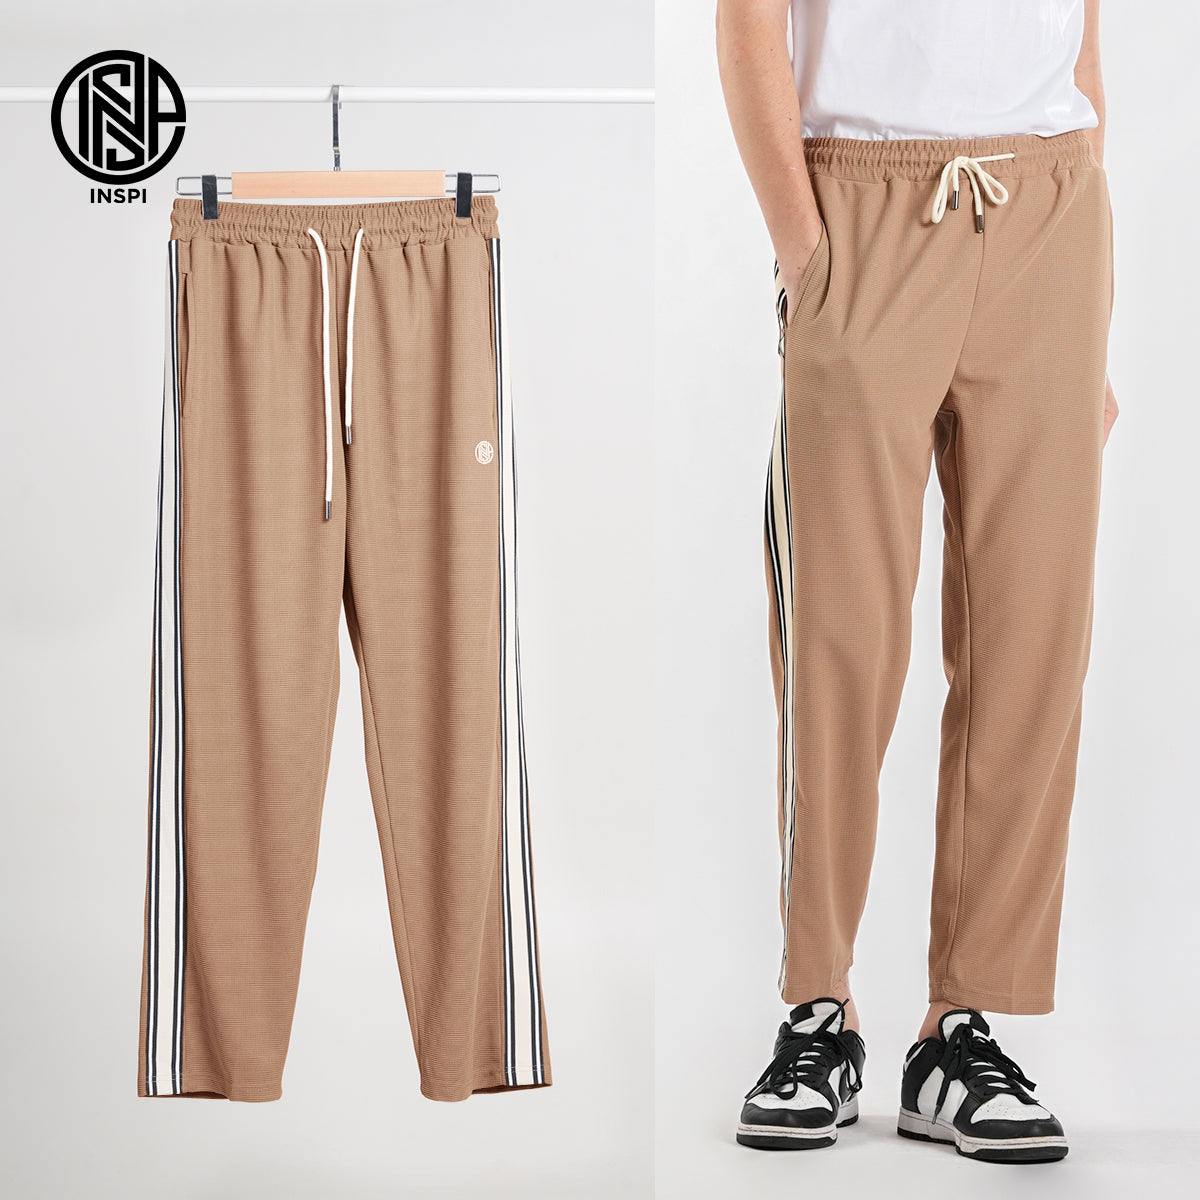 INSPI Waffle Pants with Drawstring and Pockets for Men and Women.